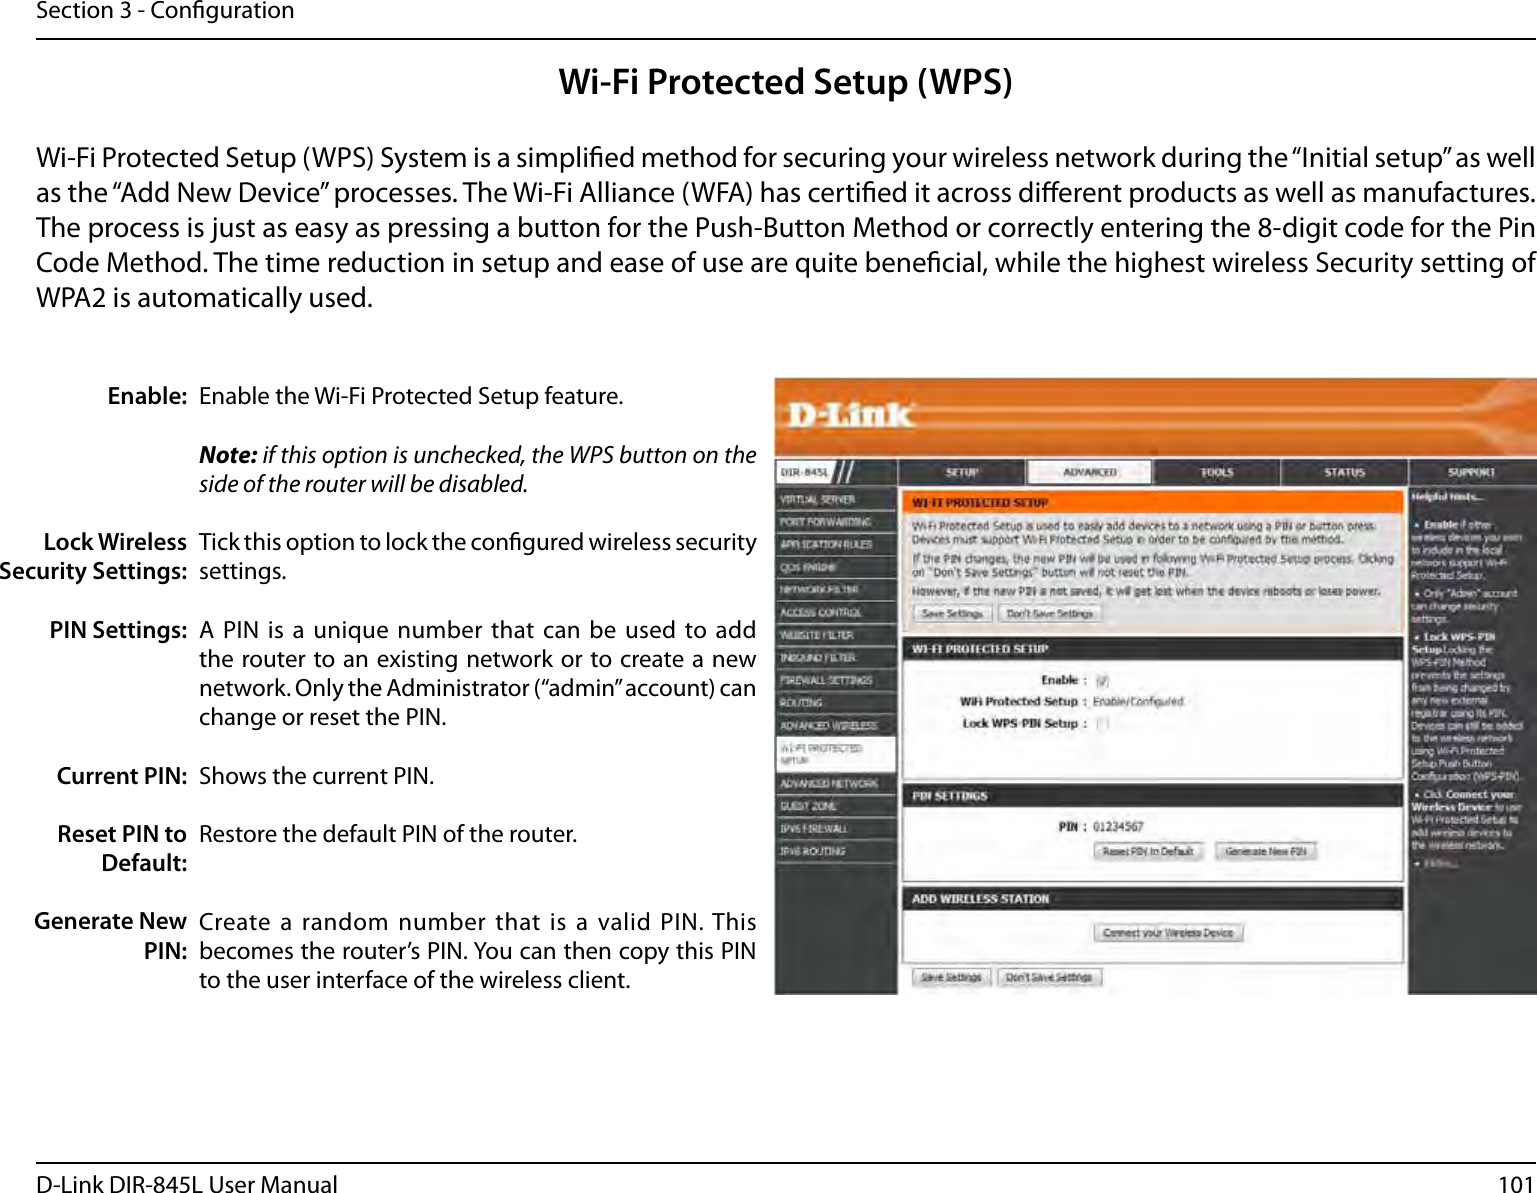 101D-Link DIR-845L User ManualSection 3 - CongurationWi-Fi Protected Setup (WPS)Enable the Wi-Fi Protected Setup feature. Note: if this option is unchecked, the WPS button on the side of the router will be disabled.Tick this option to lock the congured wireless security settings.A PIN  is a  unique  number that  can be used  to add the router to an existing network or to create a new network. Only the Administrator (“admin” account) can change or reset the PIN. Shows the current PIN. Restore the default PIN of the router. Create a random number that  is a  valid PIN. This becomes the router’s PIN. You can then copy this PIN to the user interface of the wireless client.Enable:Lock Wireless Security Settings:PIN Settings:Current PIN:Reset PIN to Default:Generate New PIN:Wi-Fi Protected Setup (WPS) System is a simplied method for securing your wireless network during the “Initial setup” as well as the “Add New Device” processes. The Wi-Fi Alliance (WFA) has certied it across dierent products as well as manufactures. The process is just as easy as pressing a button for the Push-Button Method or correctly entering the 8-digit code for the Pin Code Method. The time reduction in setup and ease of use are quite benecial, while the highest wireless Security setting of WPA2 is automatically used.